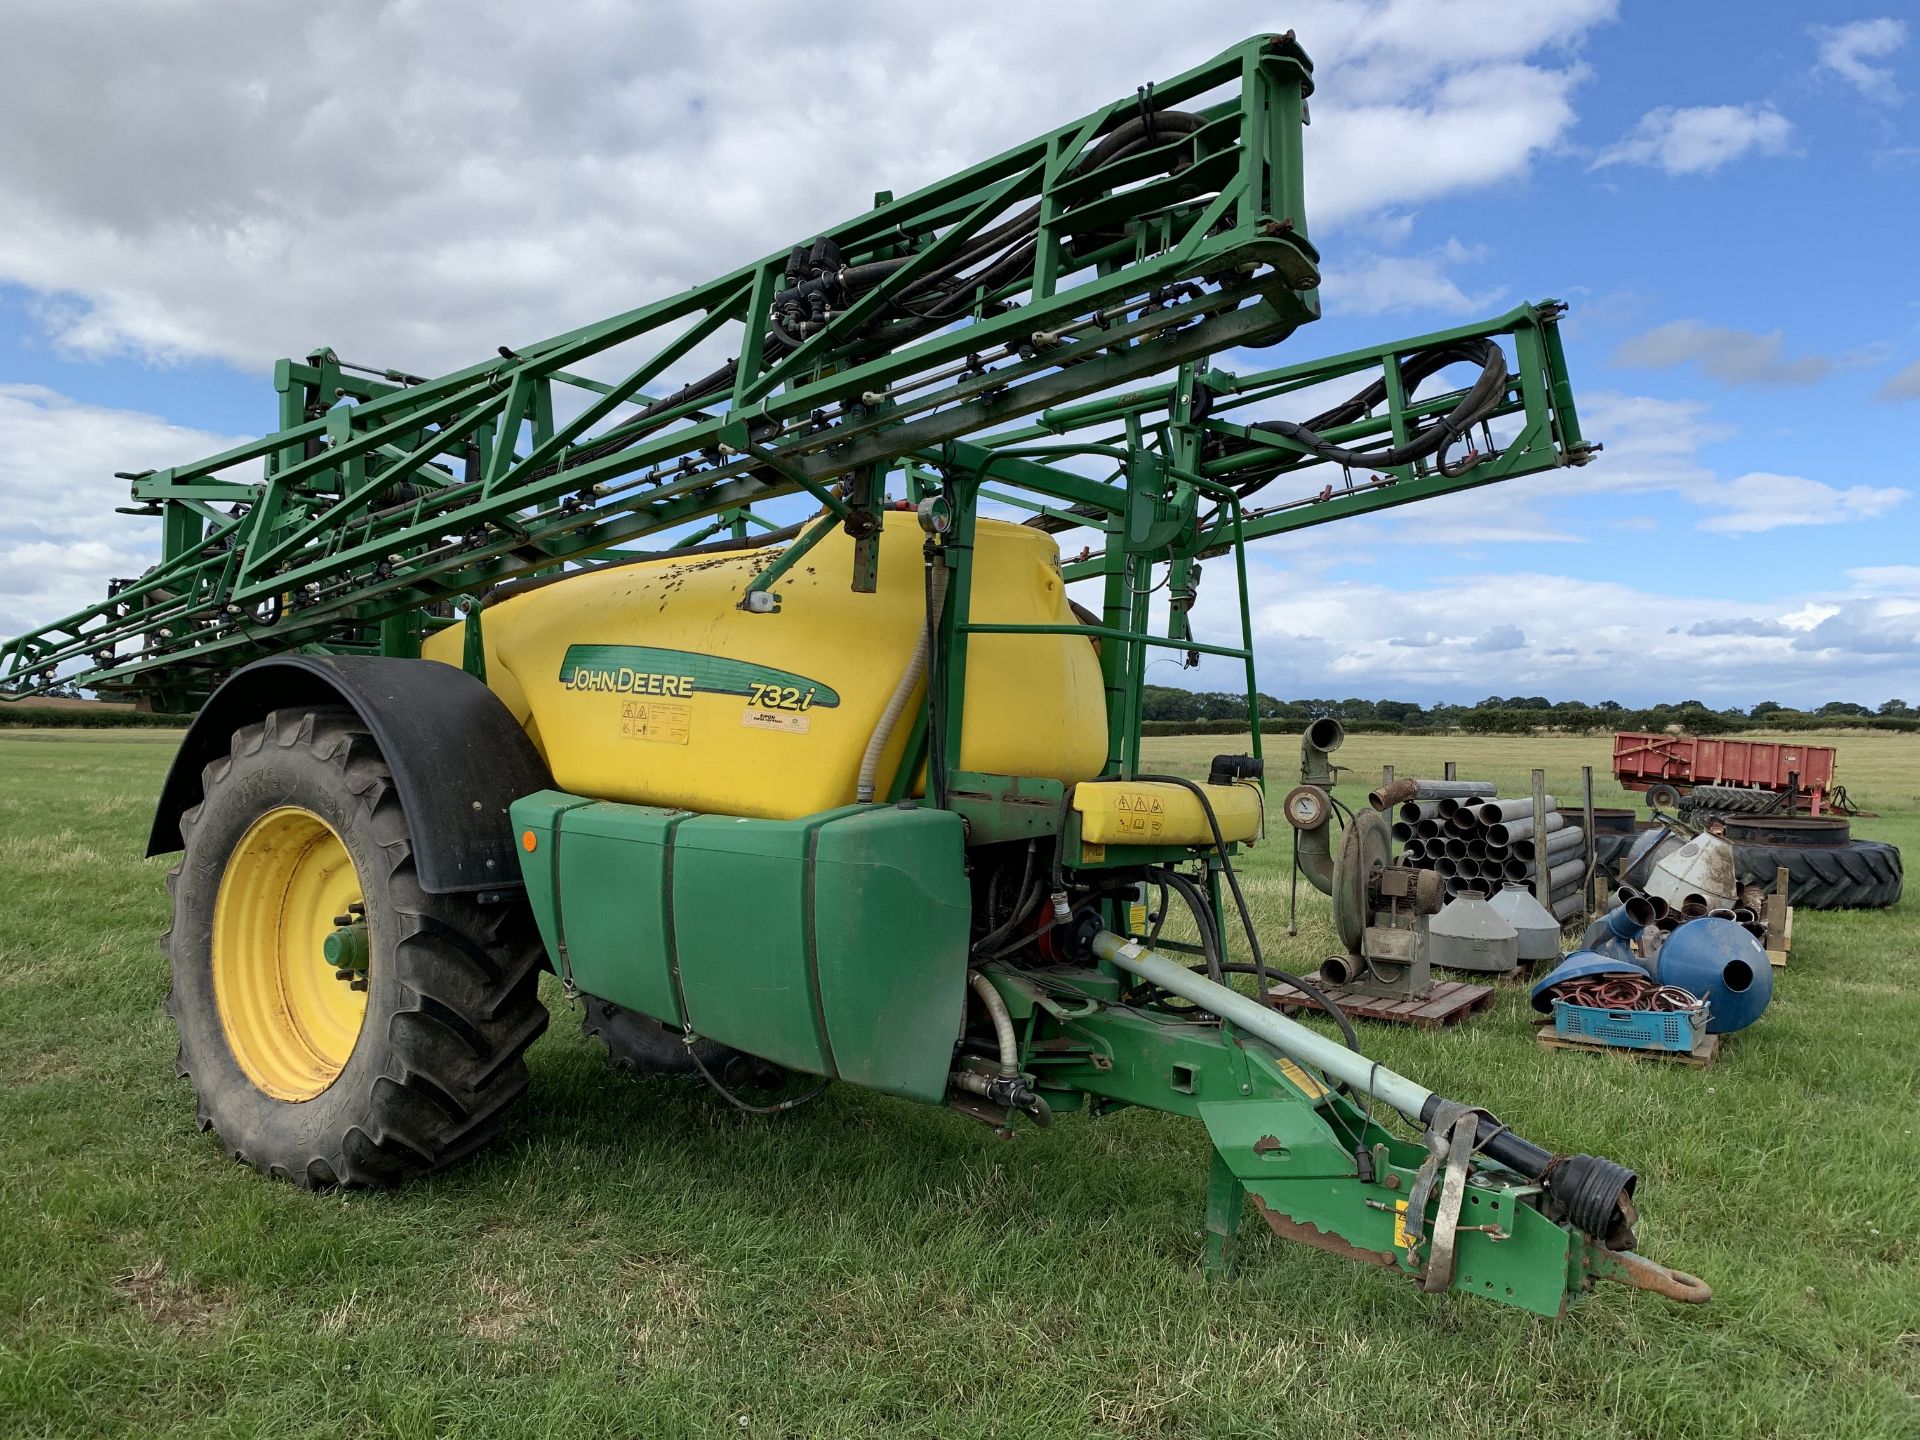 2012 John Deere 732i trailed sprayer, 24m boom, 520/70R38 tyres with 80% tread - Image 3 of 3